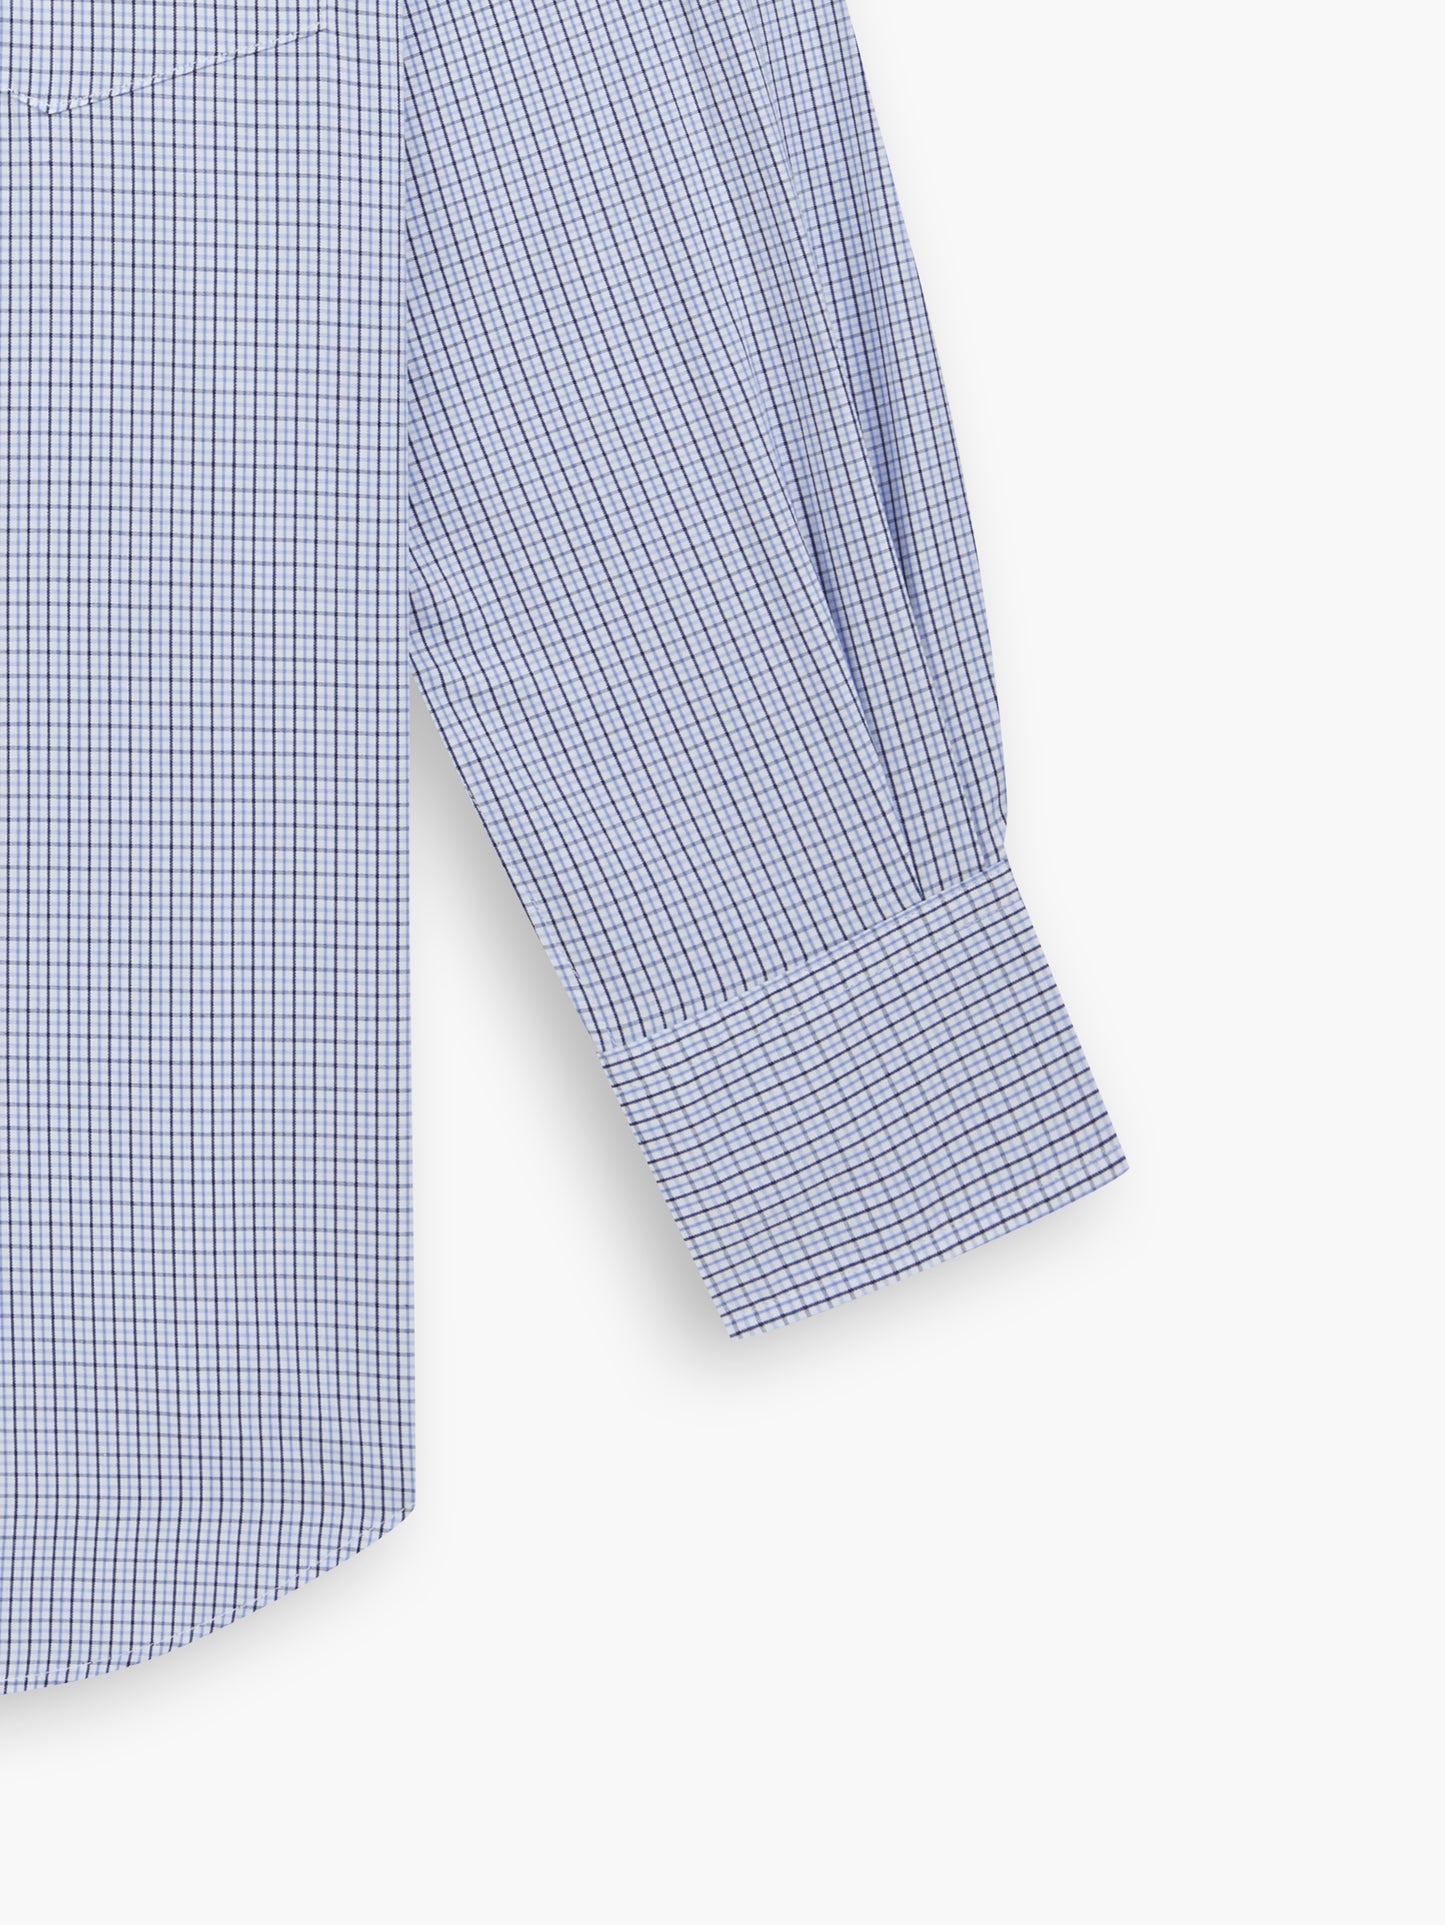 Navy & Blue Multi Grid Check Plain Weave Super Fitted Single Cuff Classic Collar Shirt